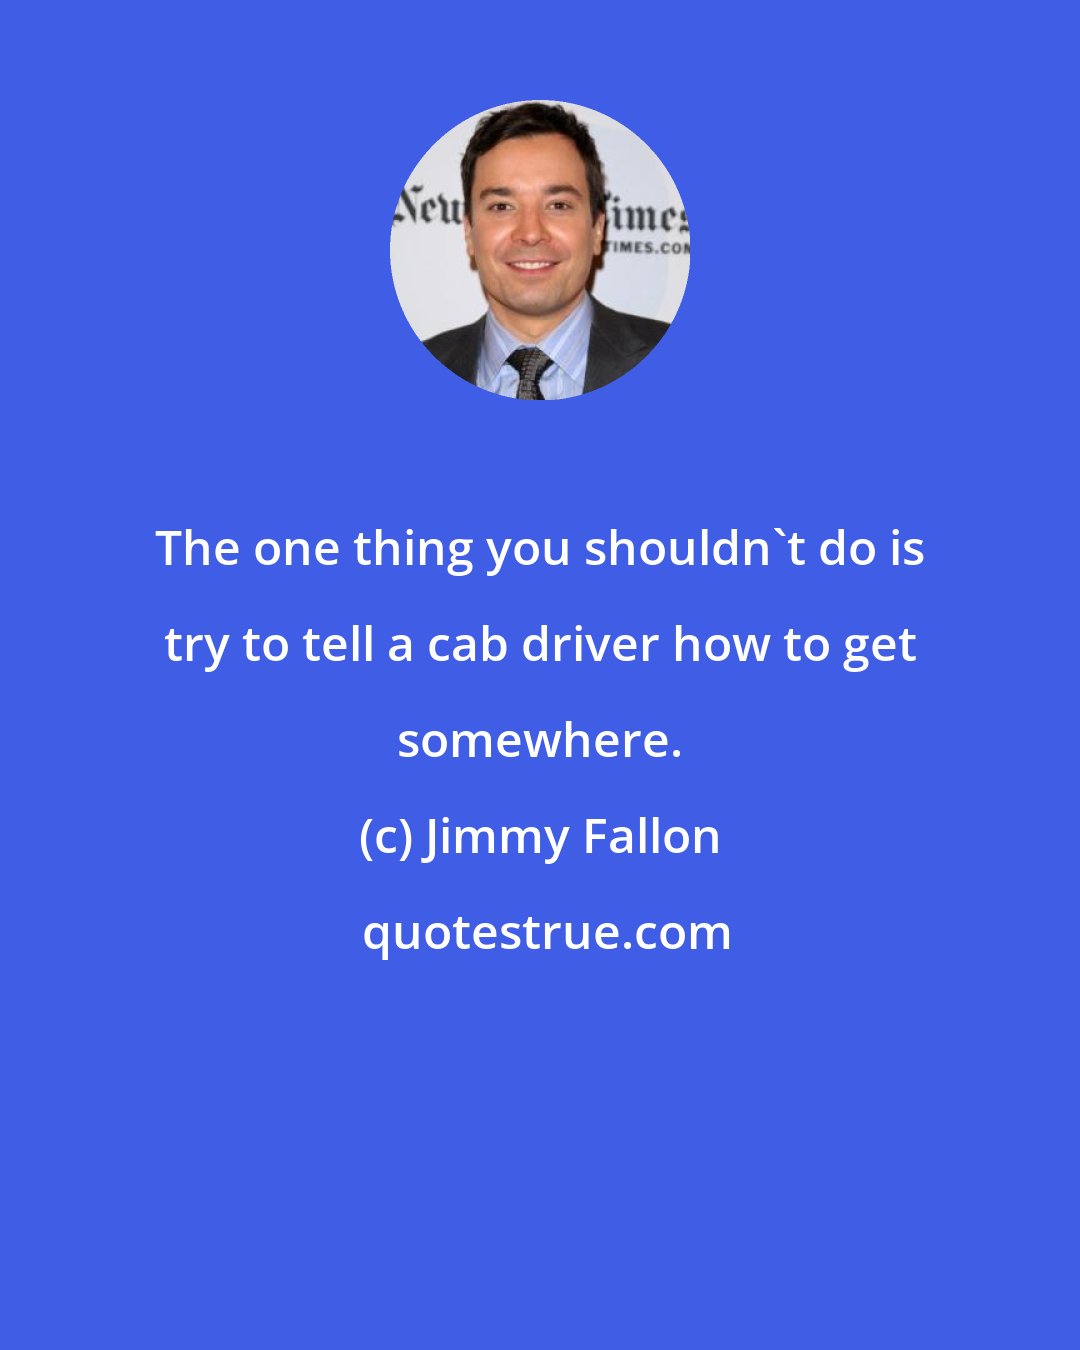 Jimmy Fallon: The one thing you shouldn't do is try to tell a cab driver how to get somewhere.